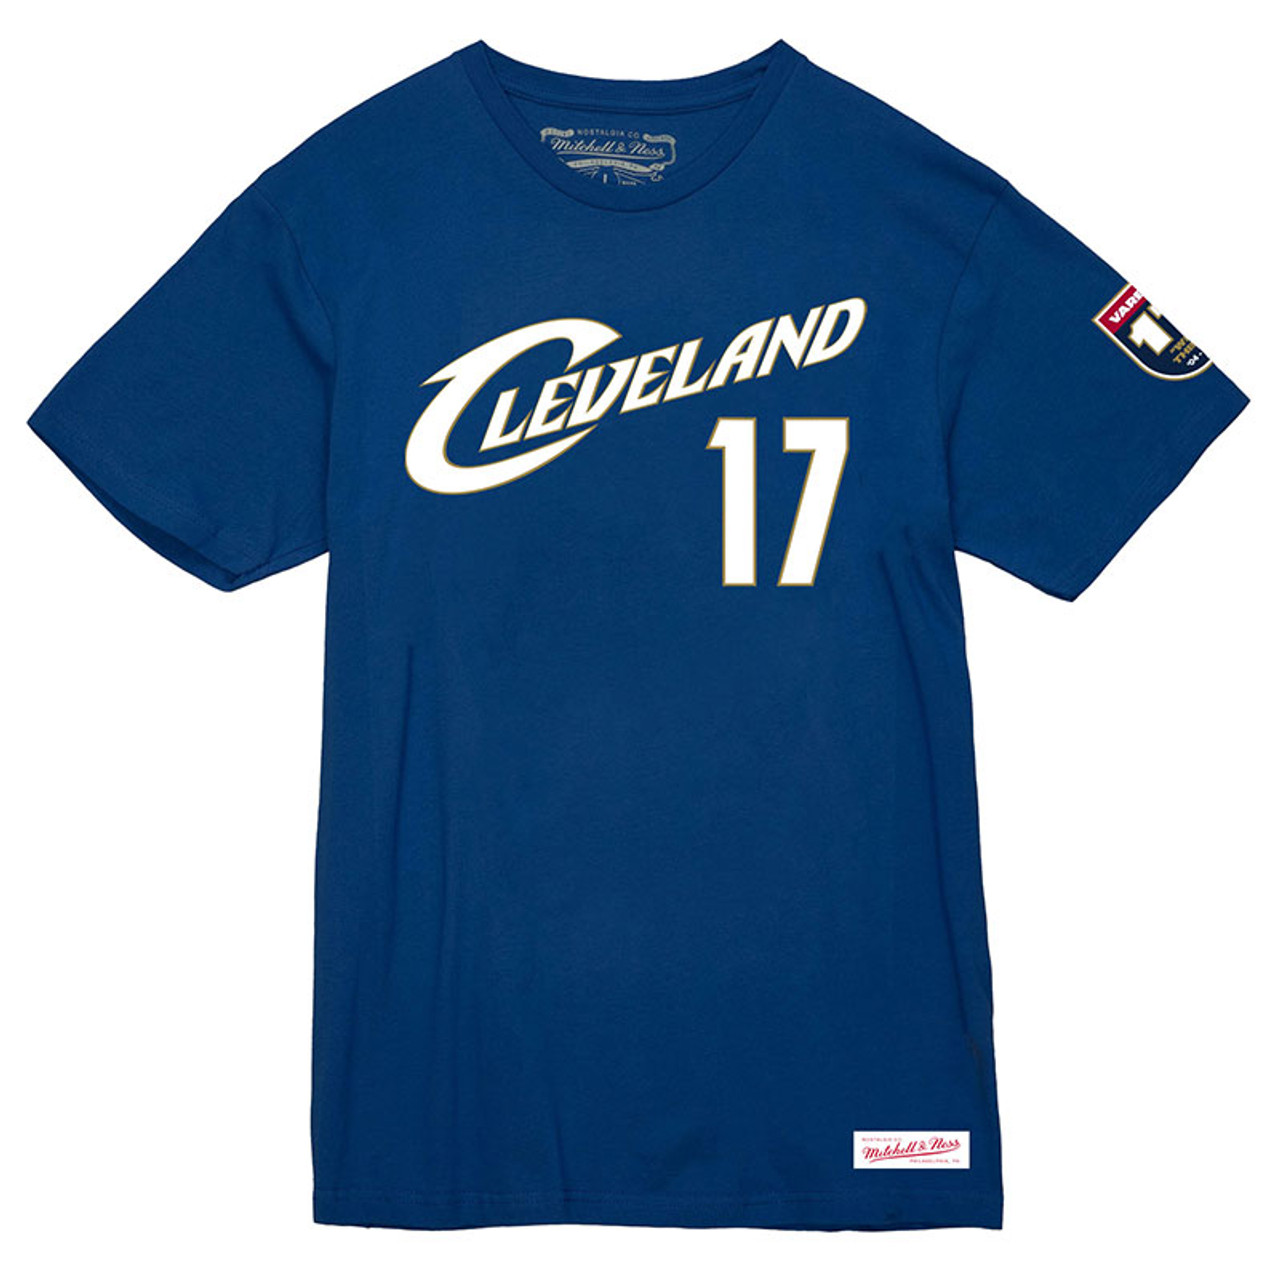 Team Store Jerseys and Player Tees Collection